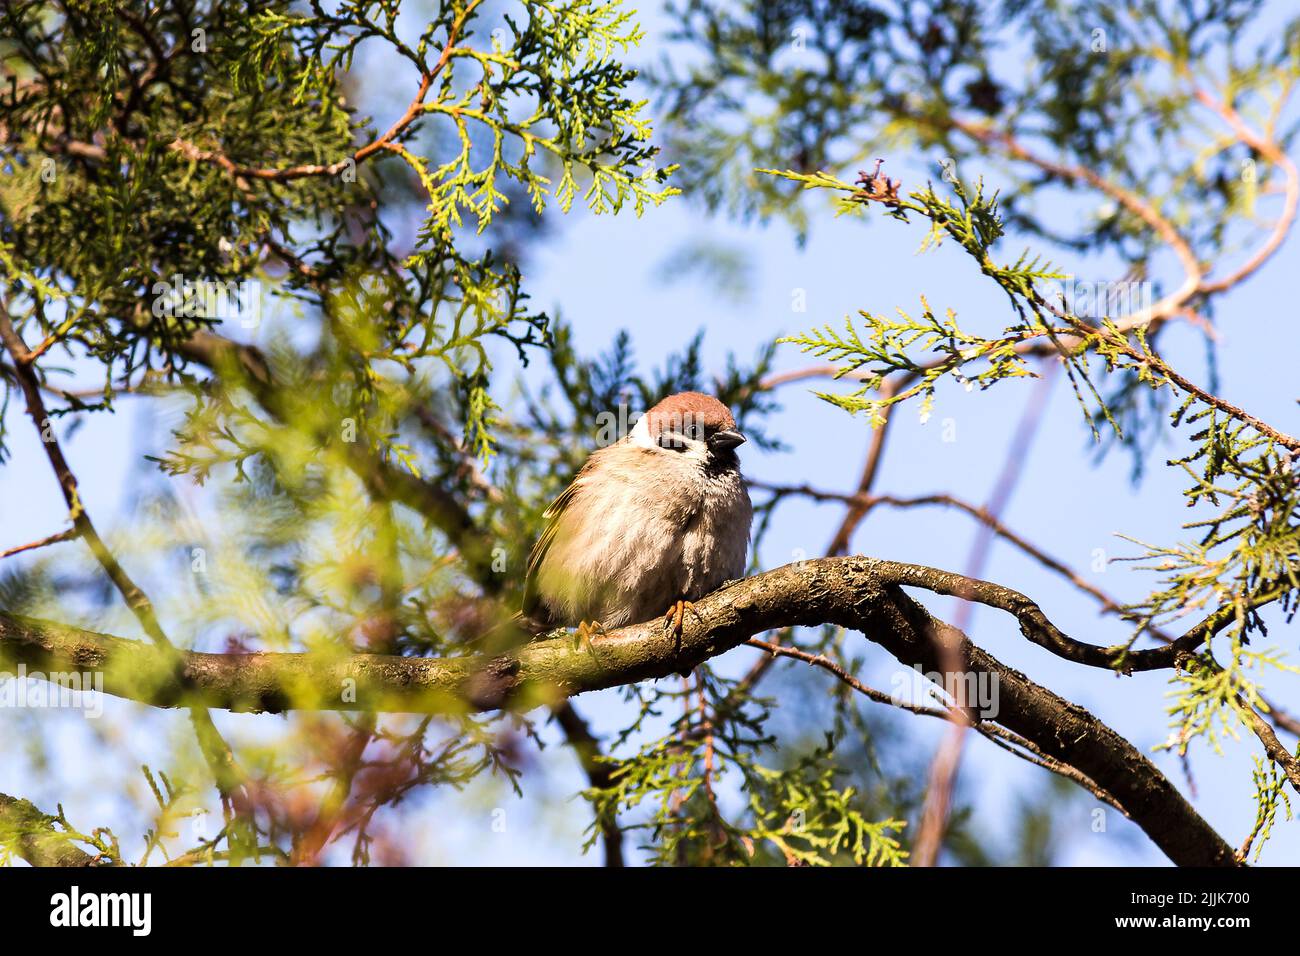 A little brown sparrow sitting on a spruce tree branch Stock Photo